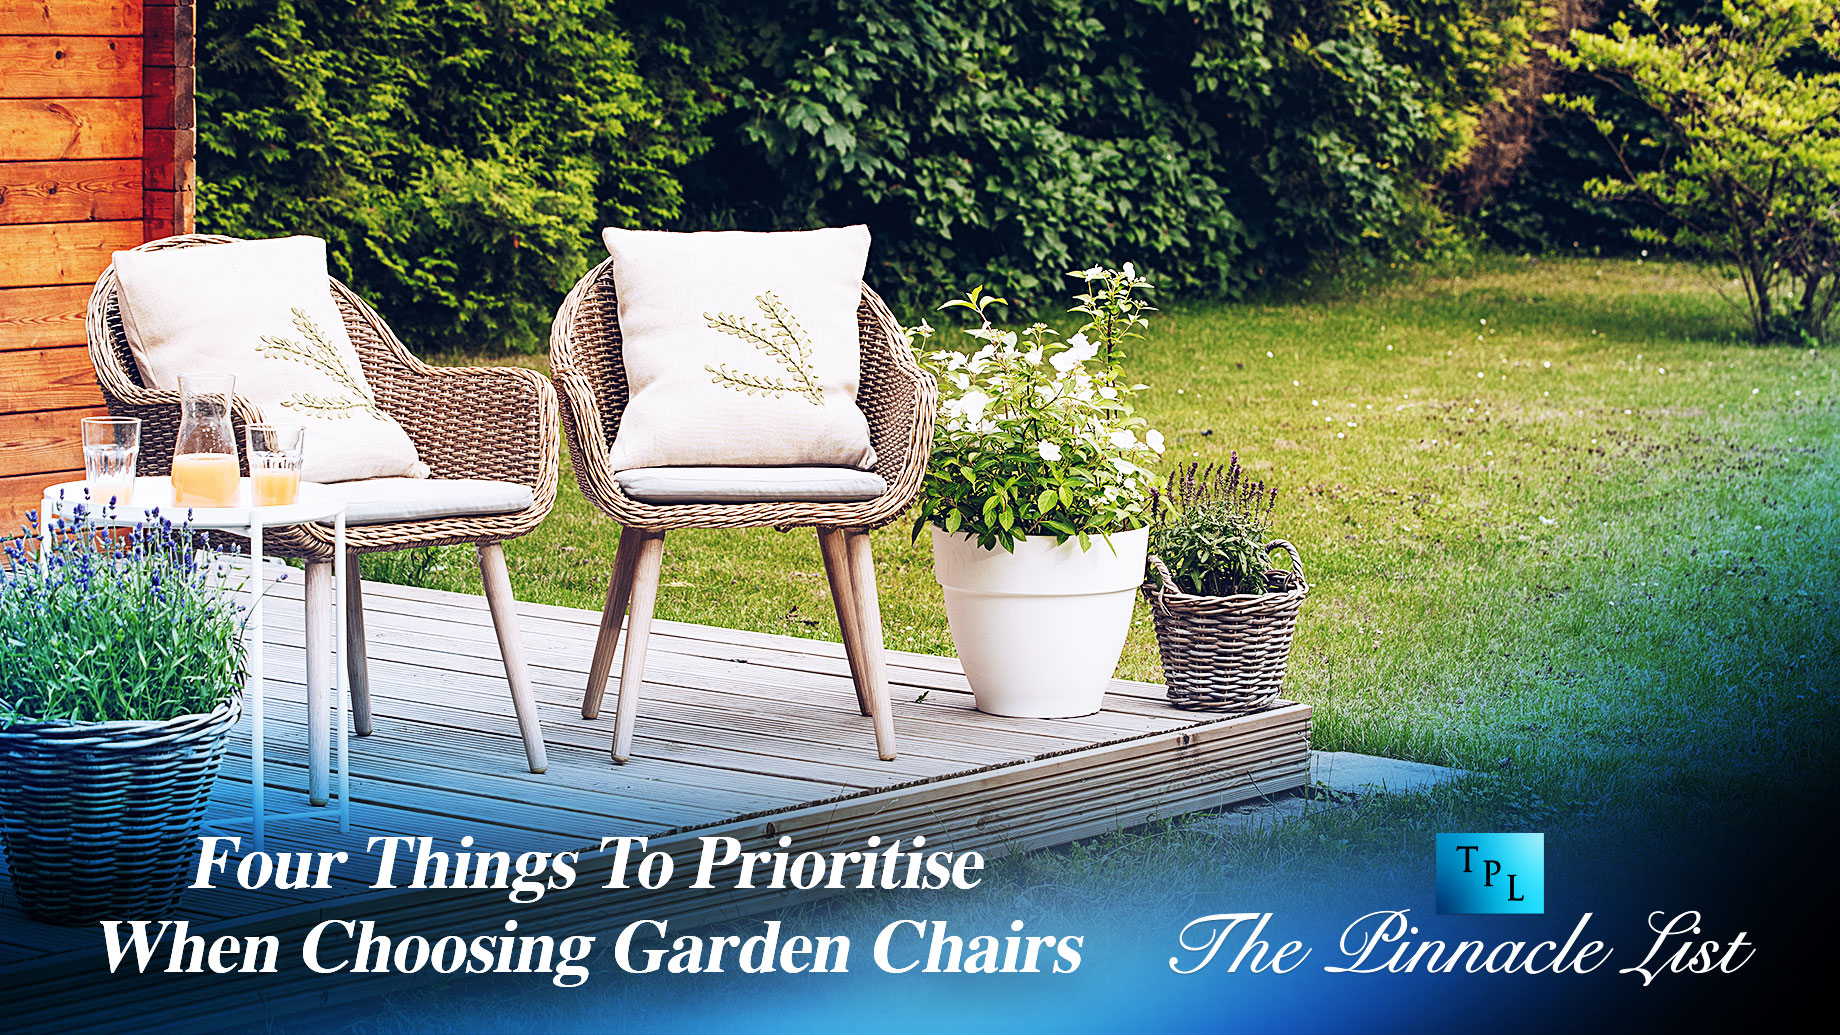 Four Things To Prioritise When Choosing Garden Chairs